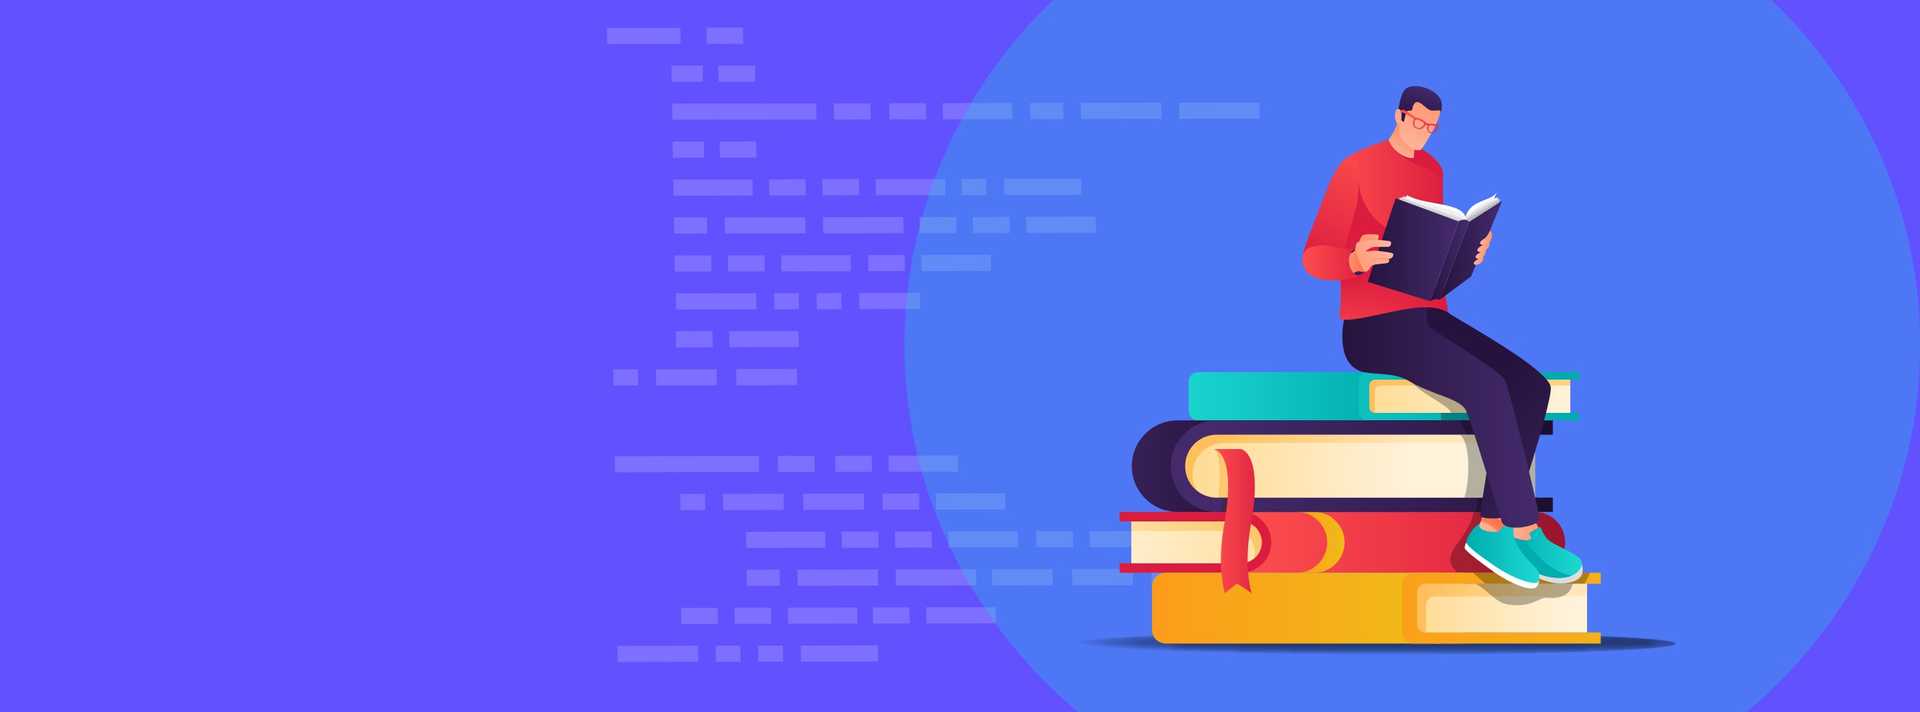 Powering up your backend knowledge? Our friends at Packt have shared five backend books you should read in 2021.